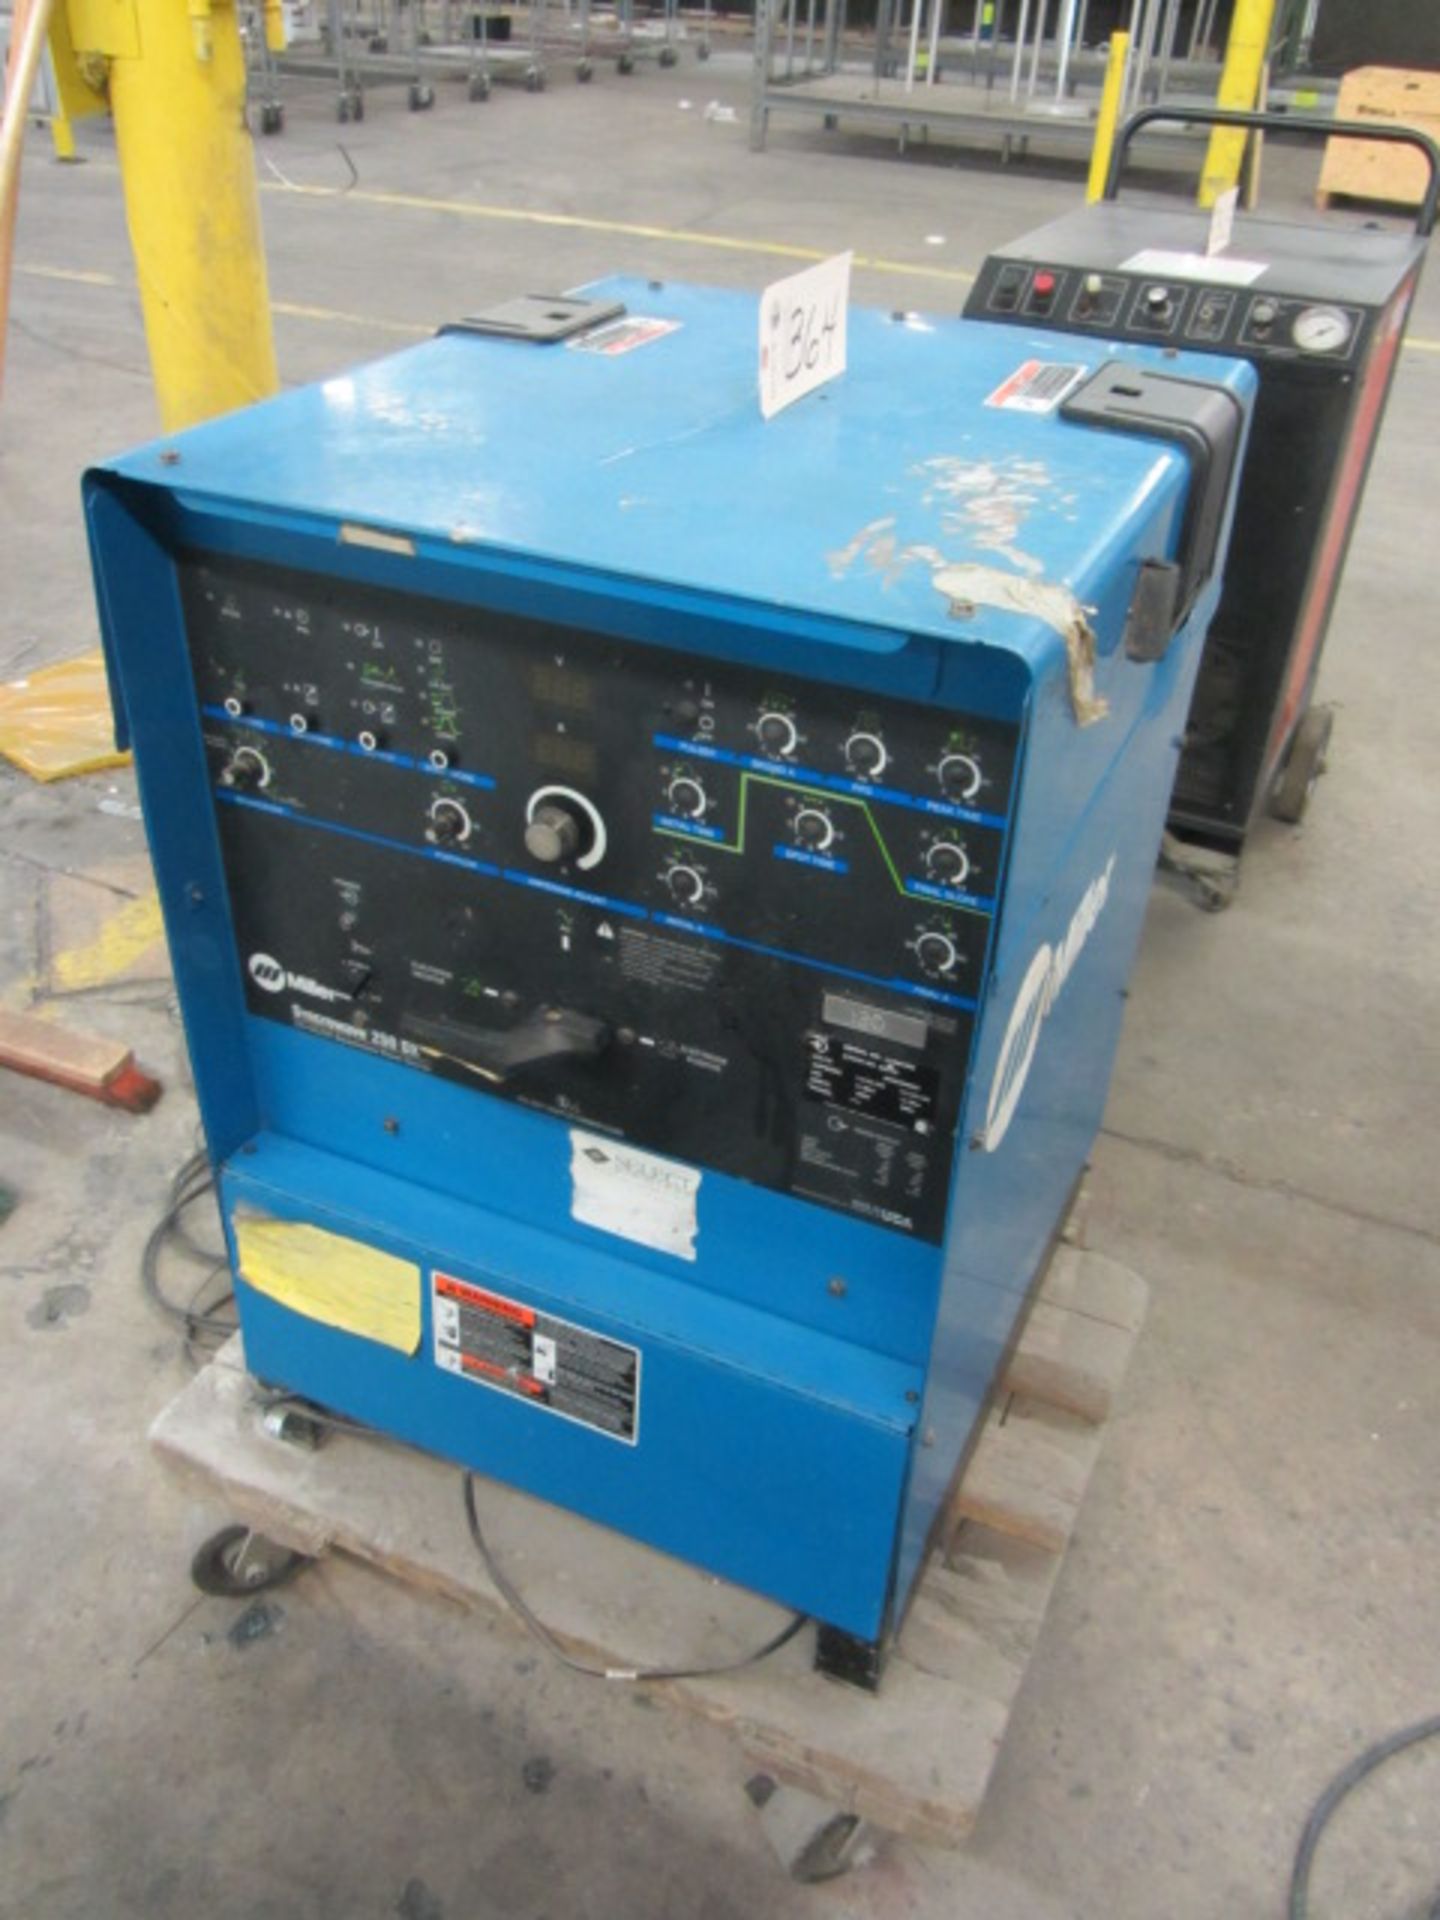 Miller Syncrowave 250DX Welder with Radiator, Guns, sn:LC547454 (cord cut)